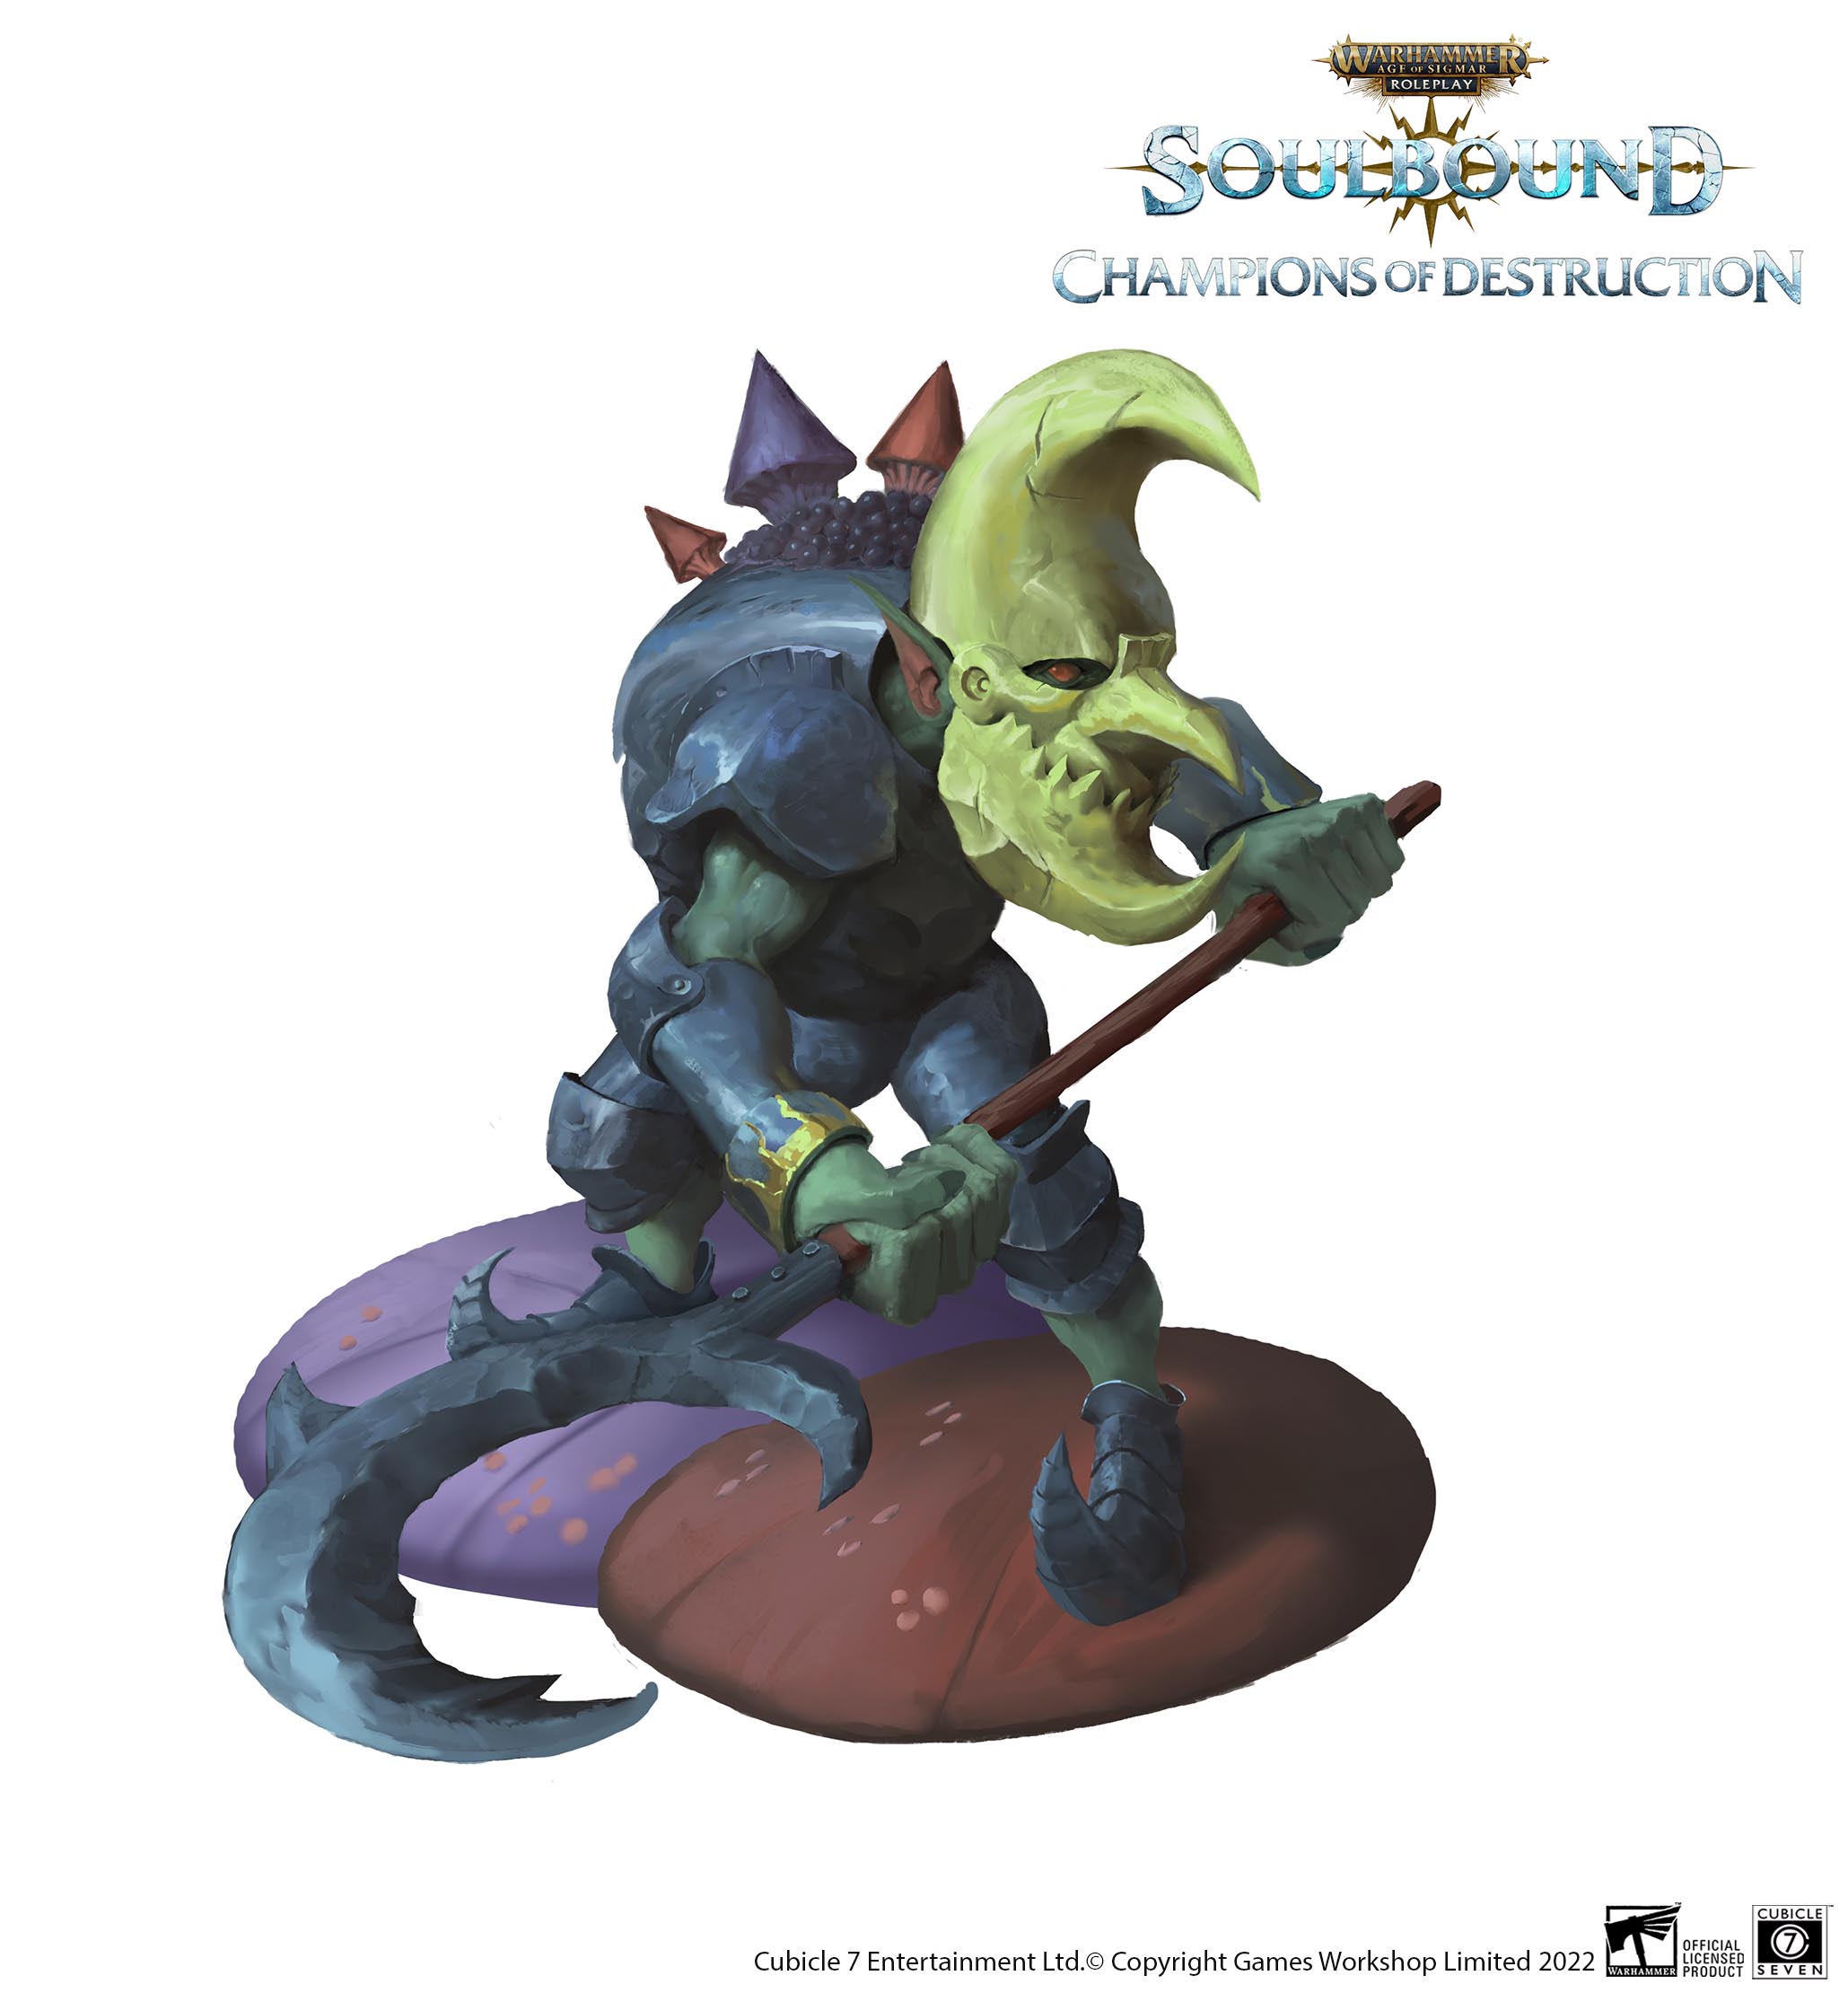 Loonboss - Warhammer Age Of Sigmar Soulbound